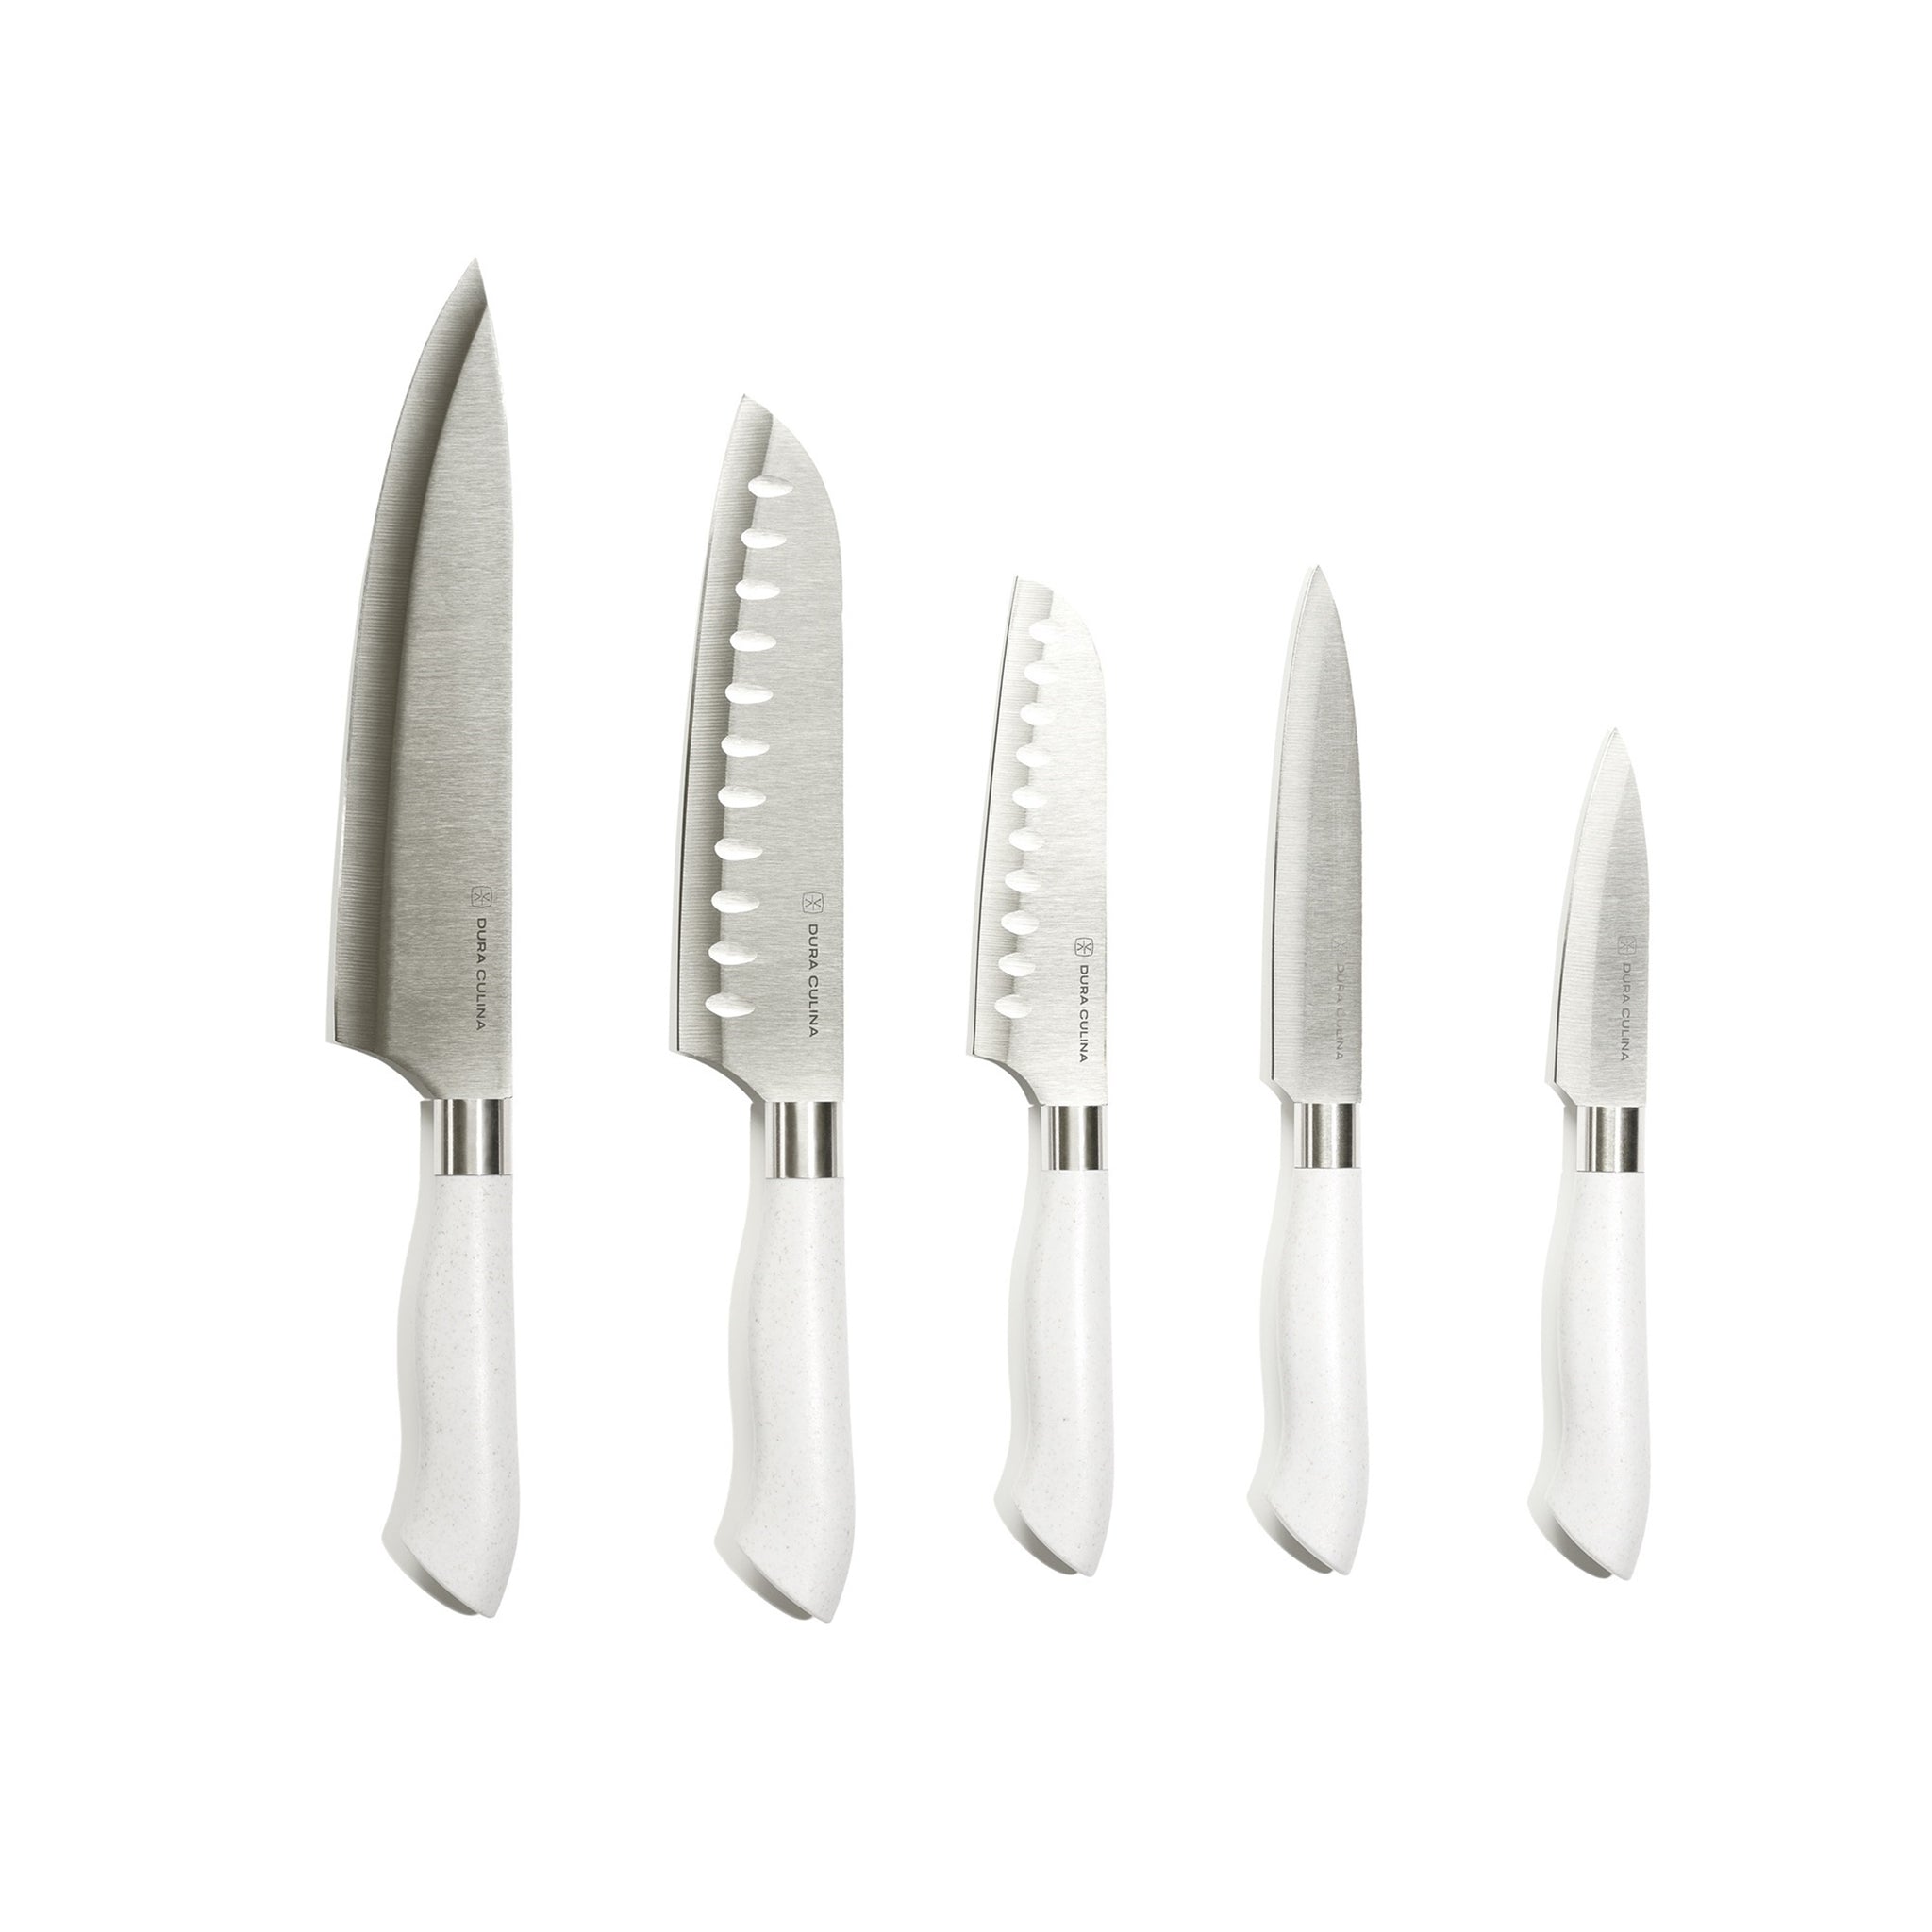 EcoCut 5 Piece Kitchen Knife Set With Blade Guards, Grey